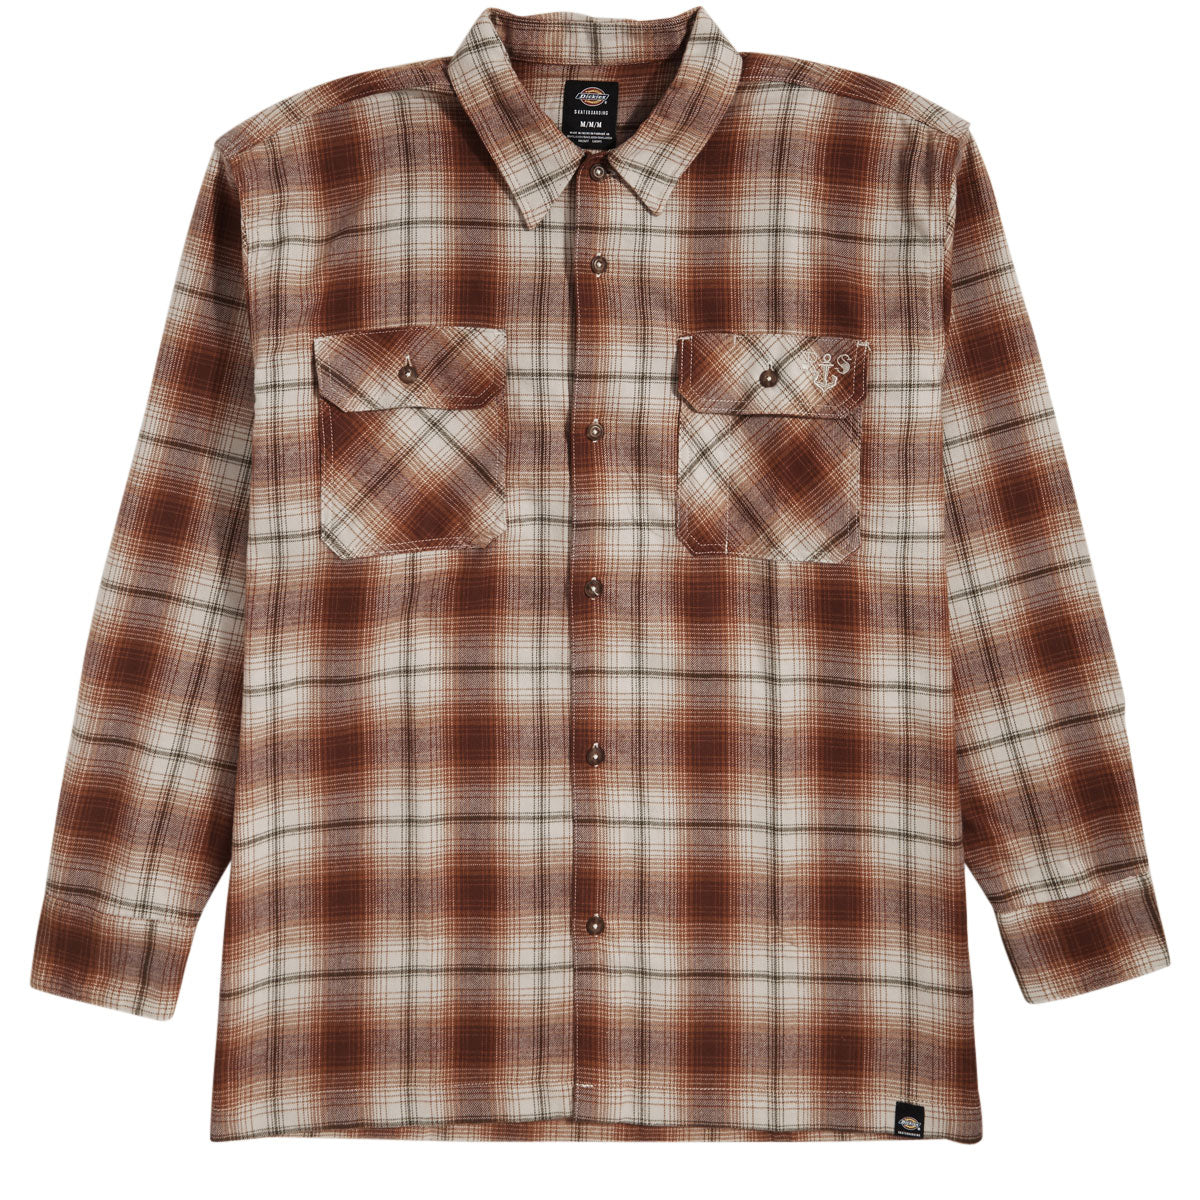 Dickies Ronnie Sandoval Brushed Flannel Shirt - Burnt Ombre Plaid image 1